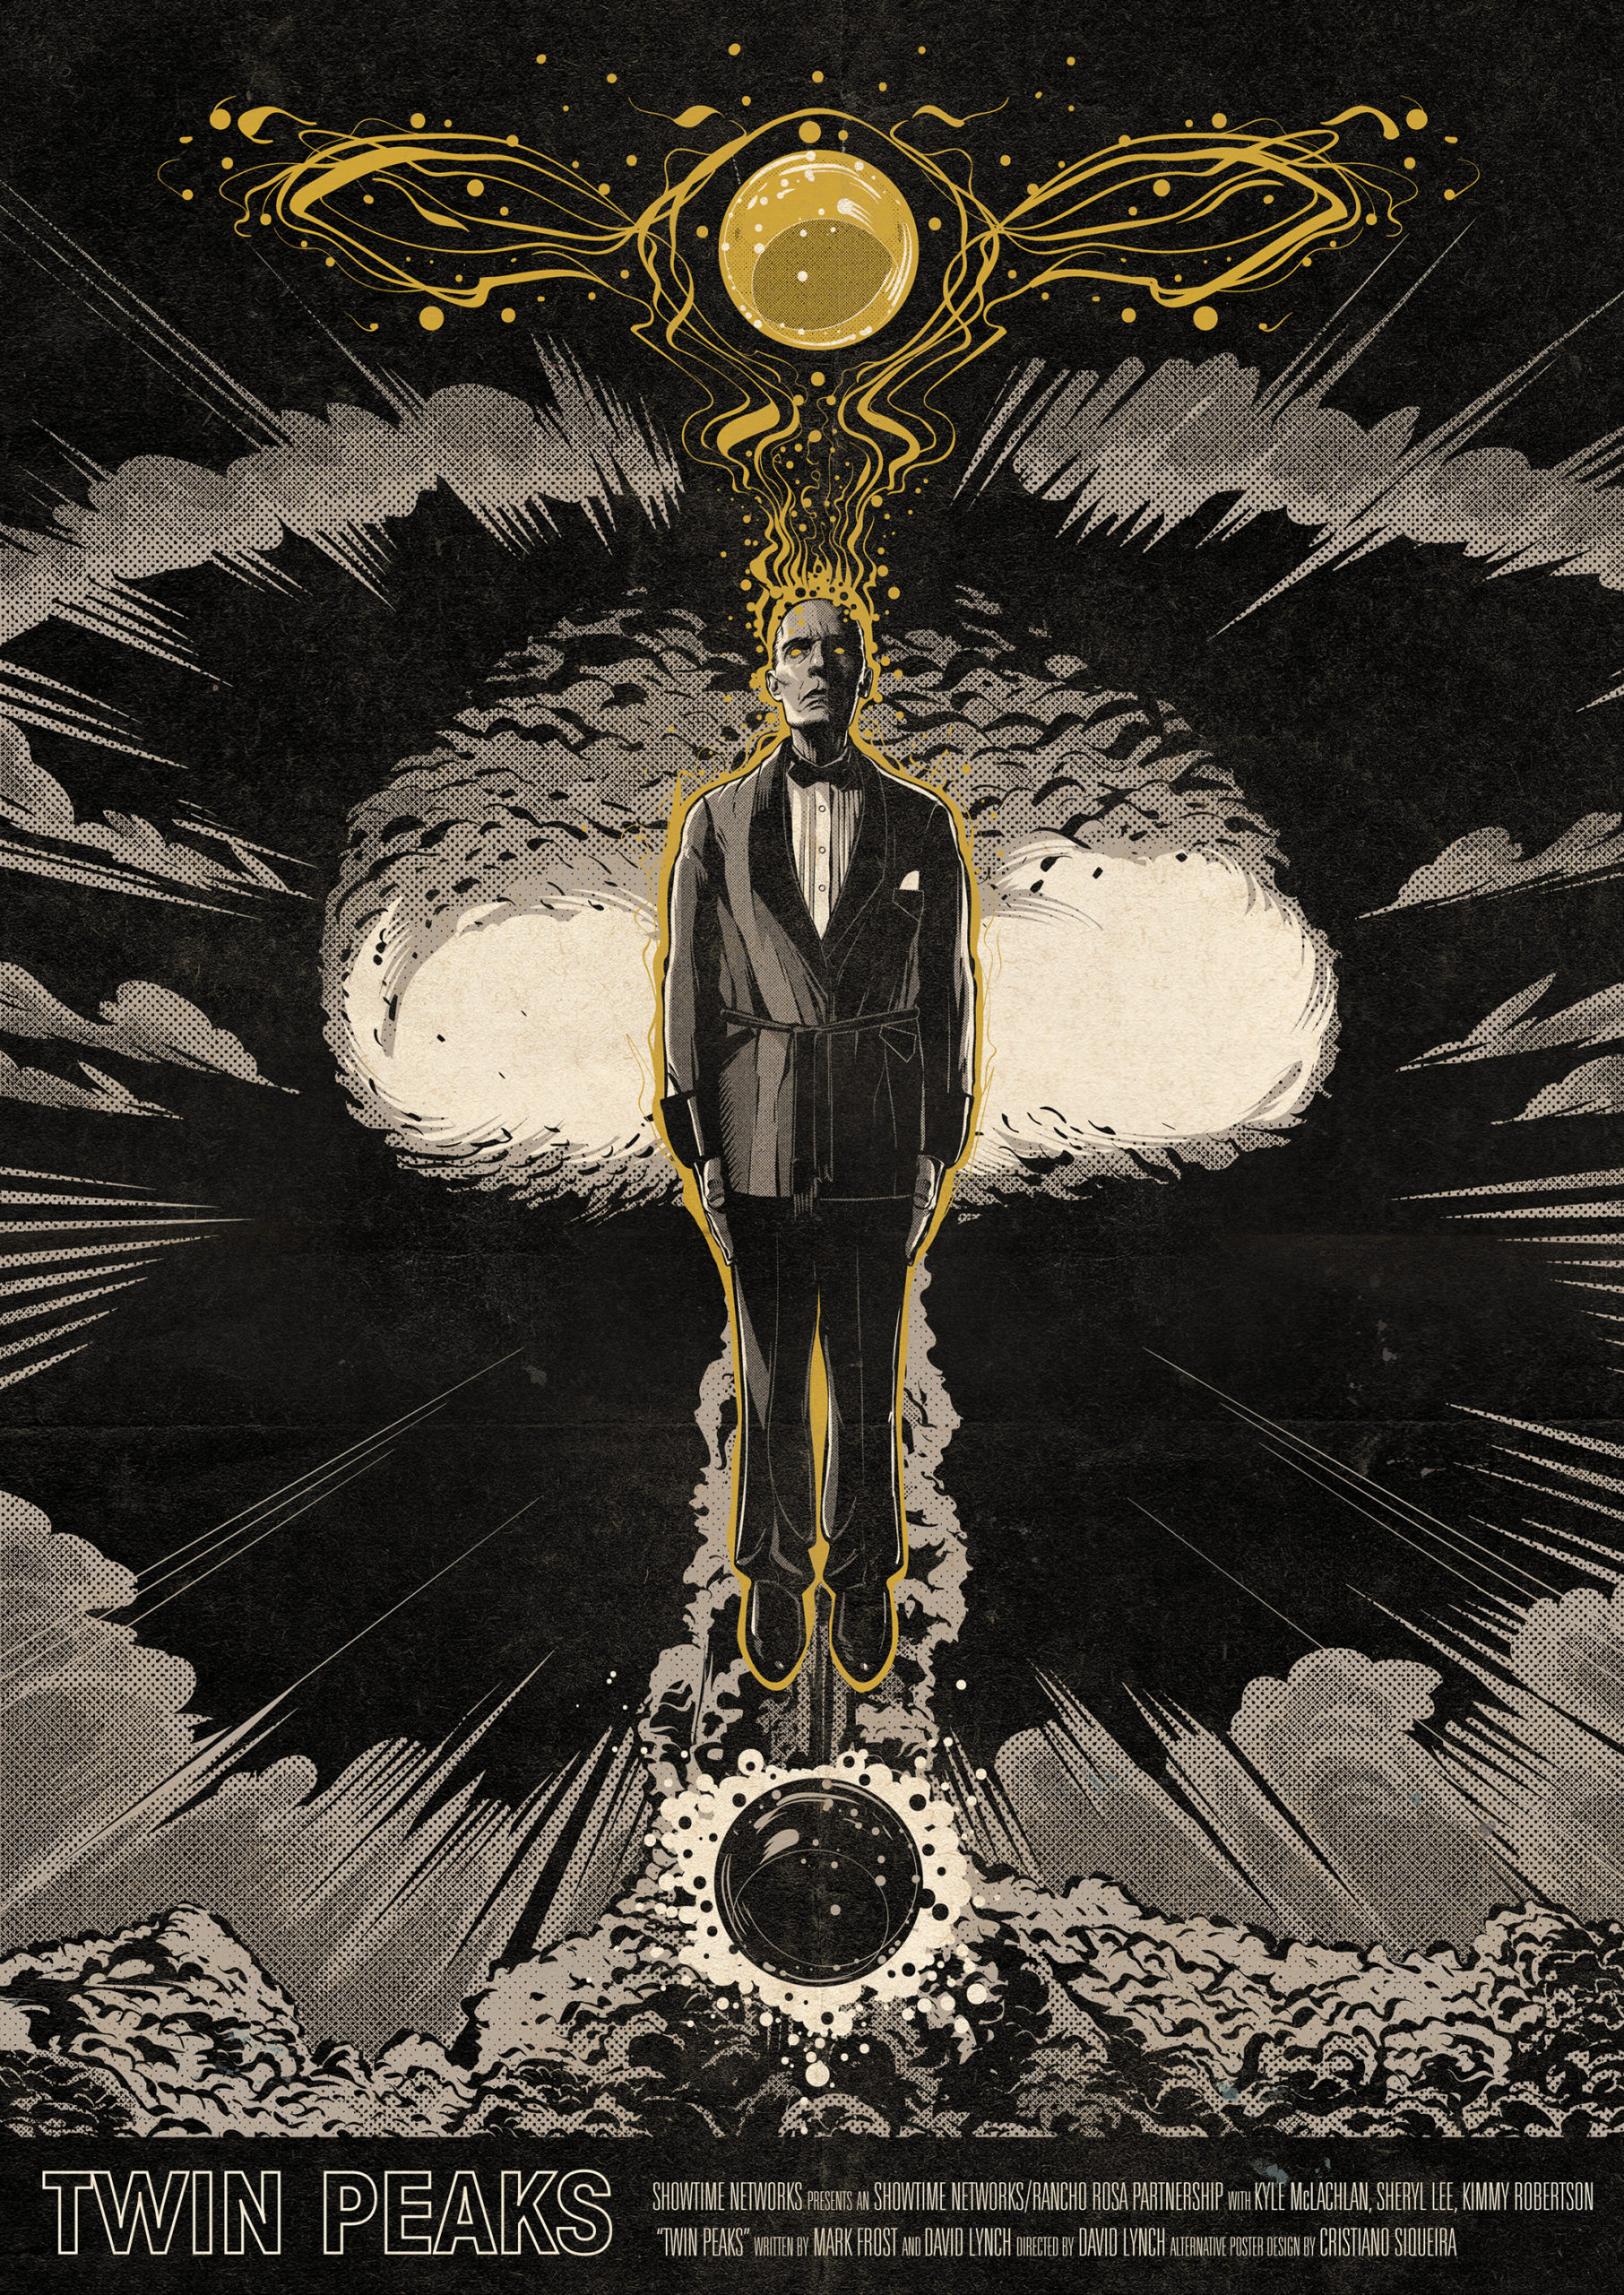 Artist Commemorates Twin Peaks: The Return With Stunning Collection Of Posters